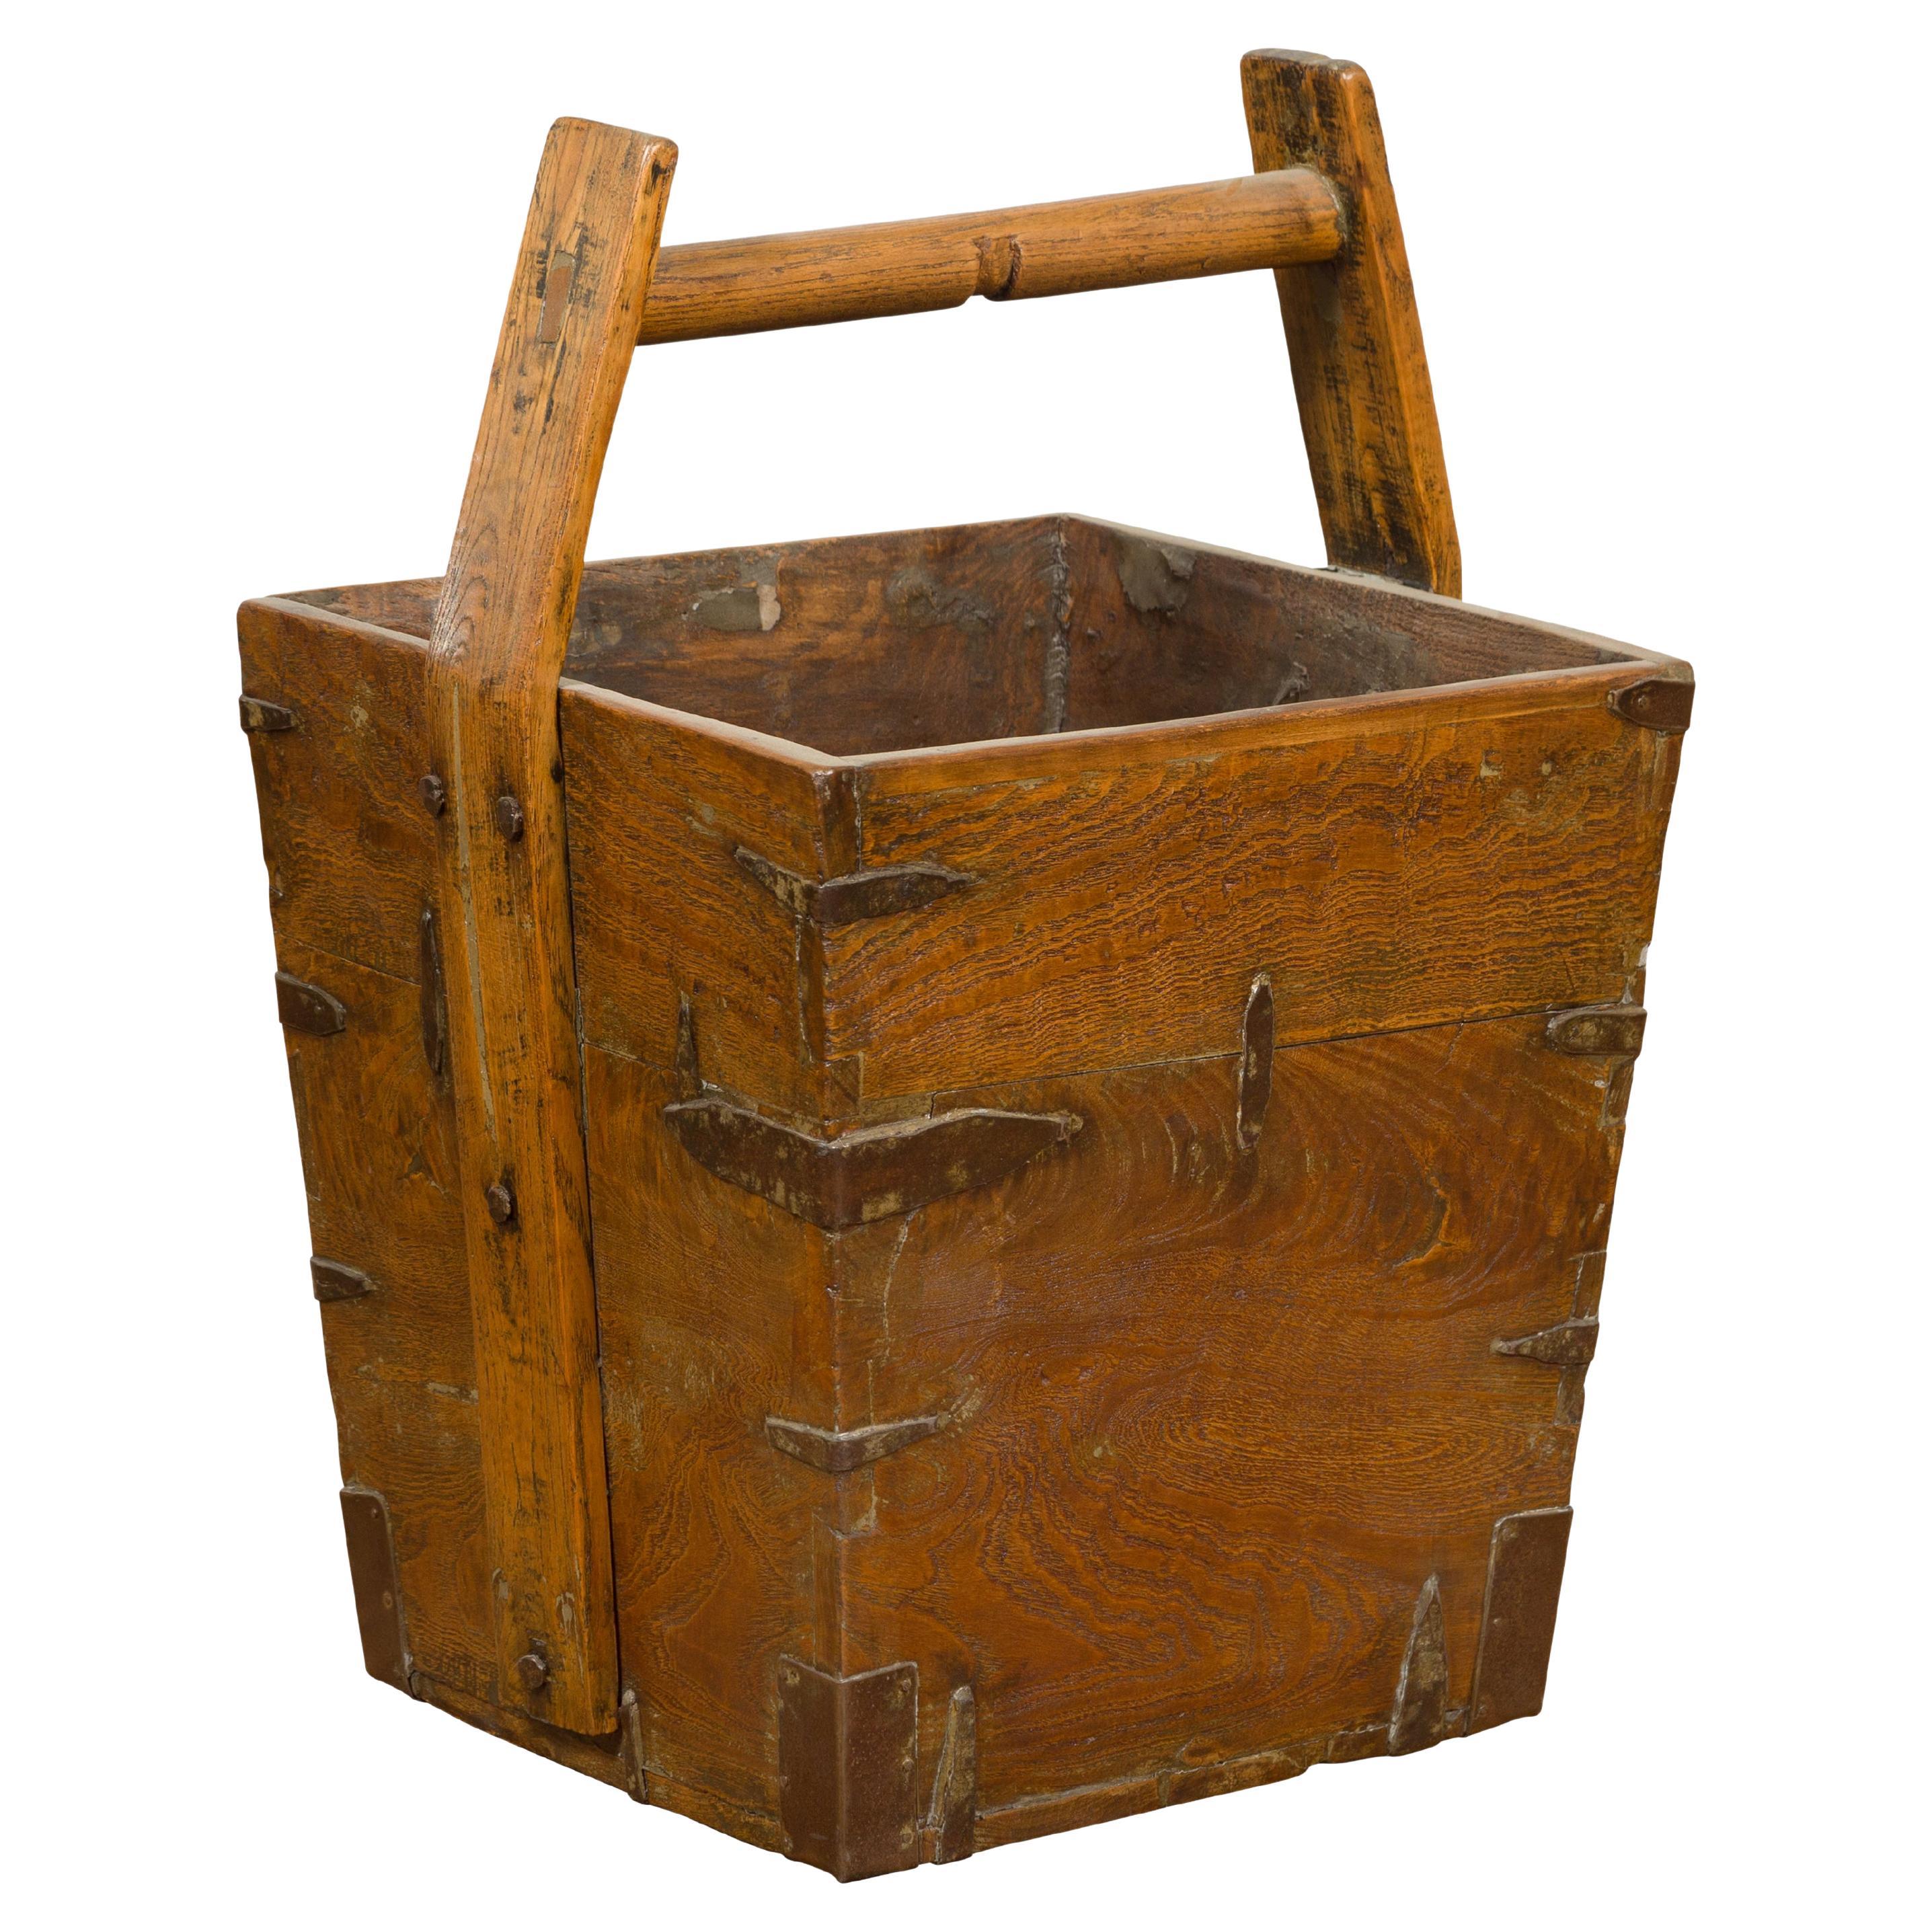 Antique Chinese 19th Century Wood and Metal Grain Basket with Carrying Handle For Sale